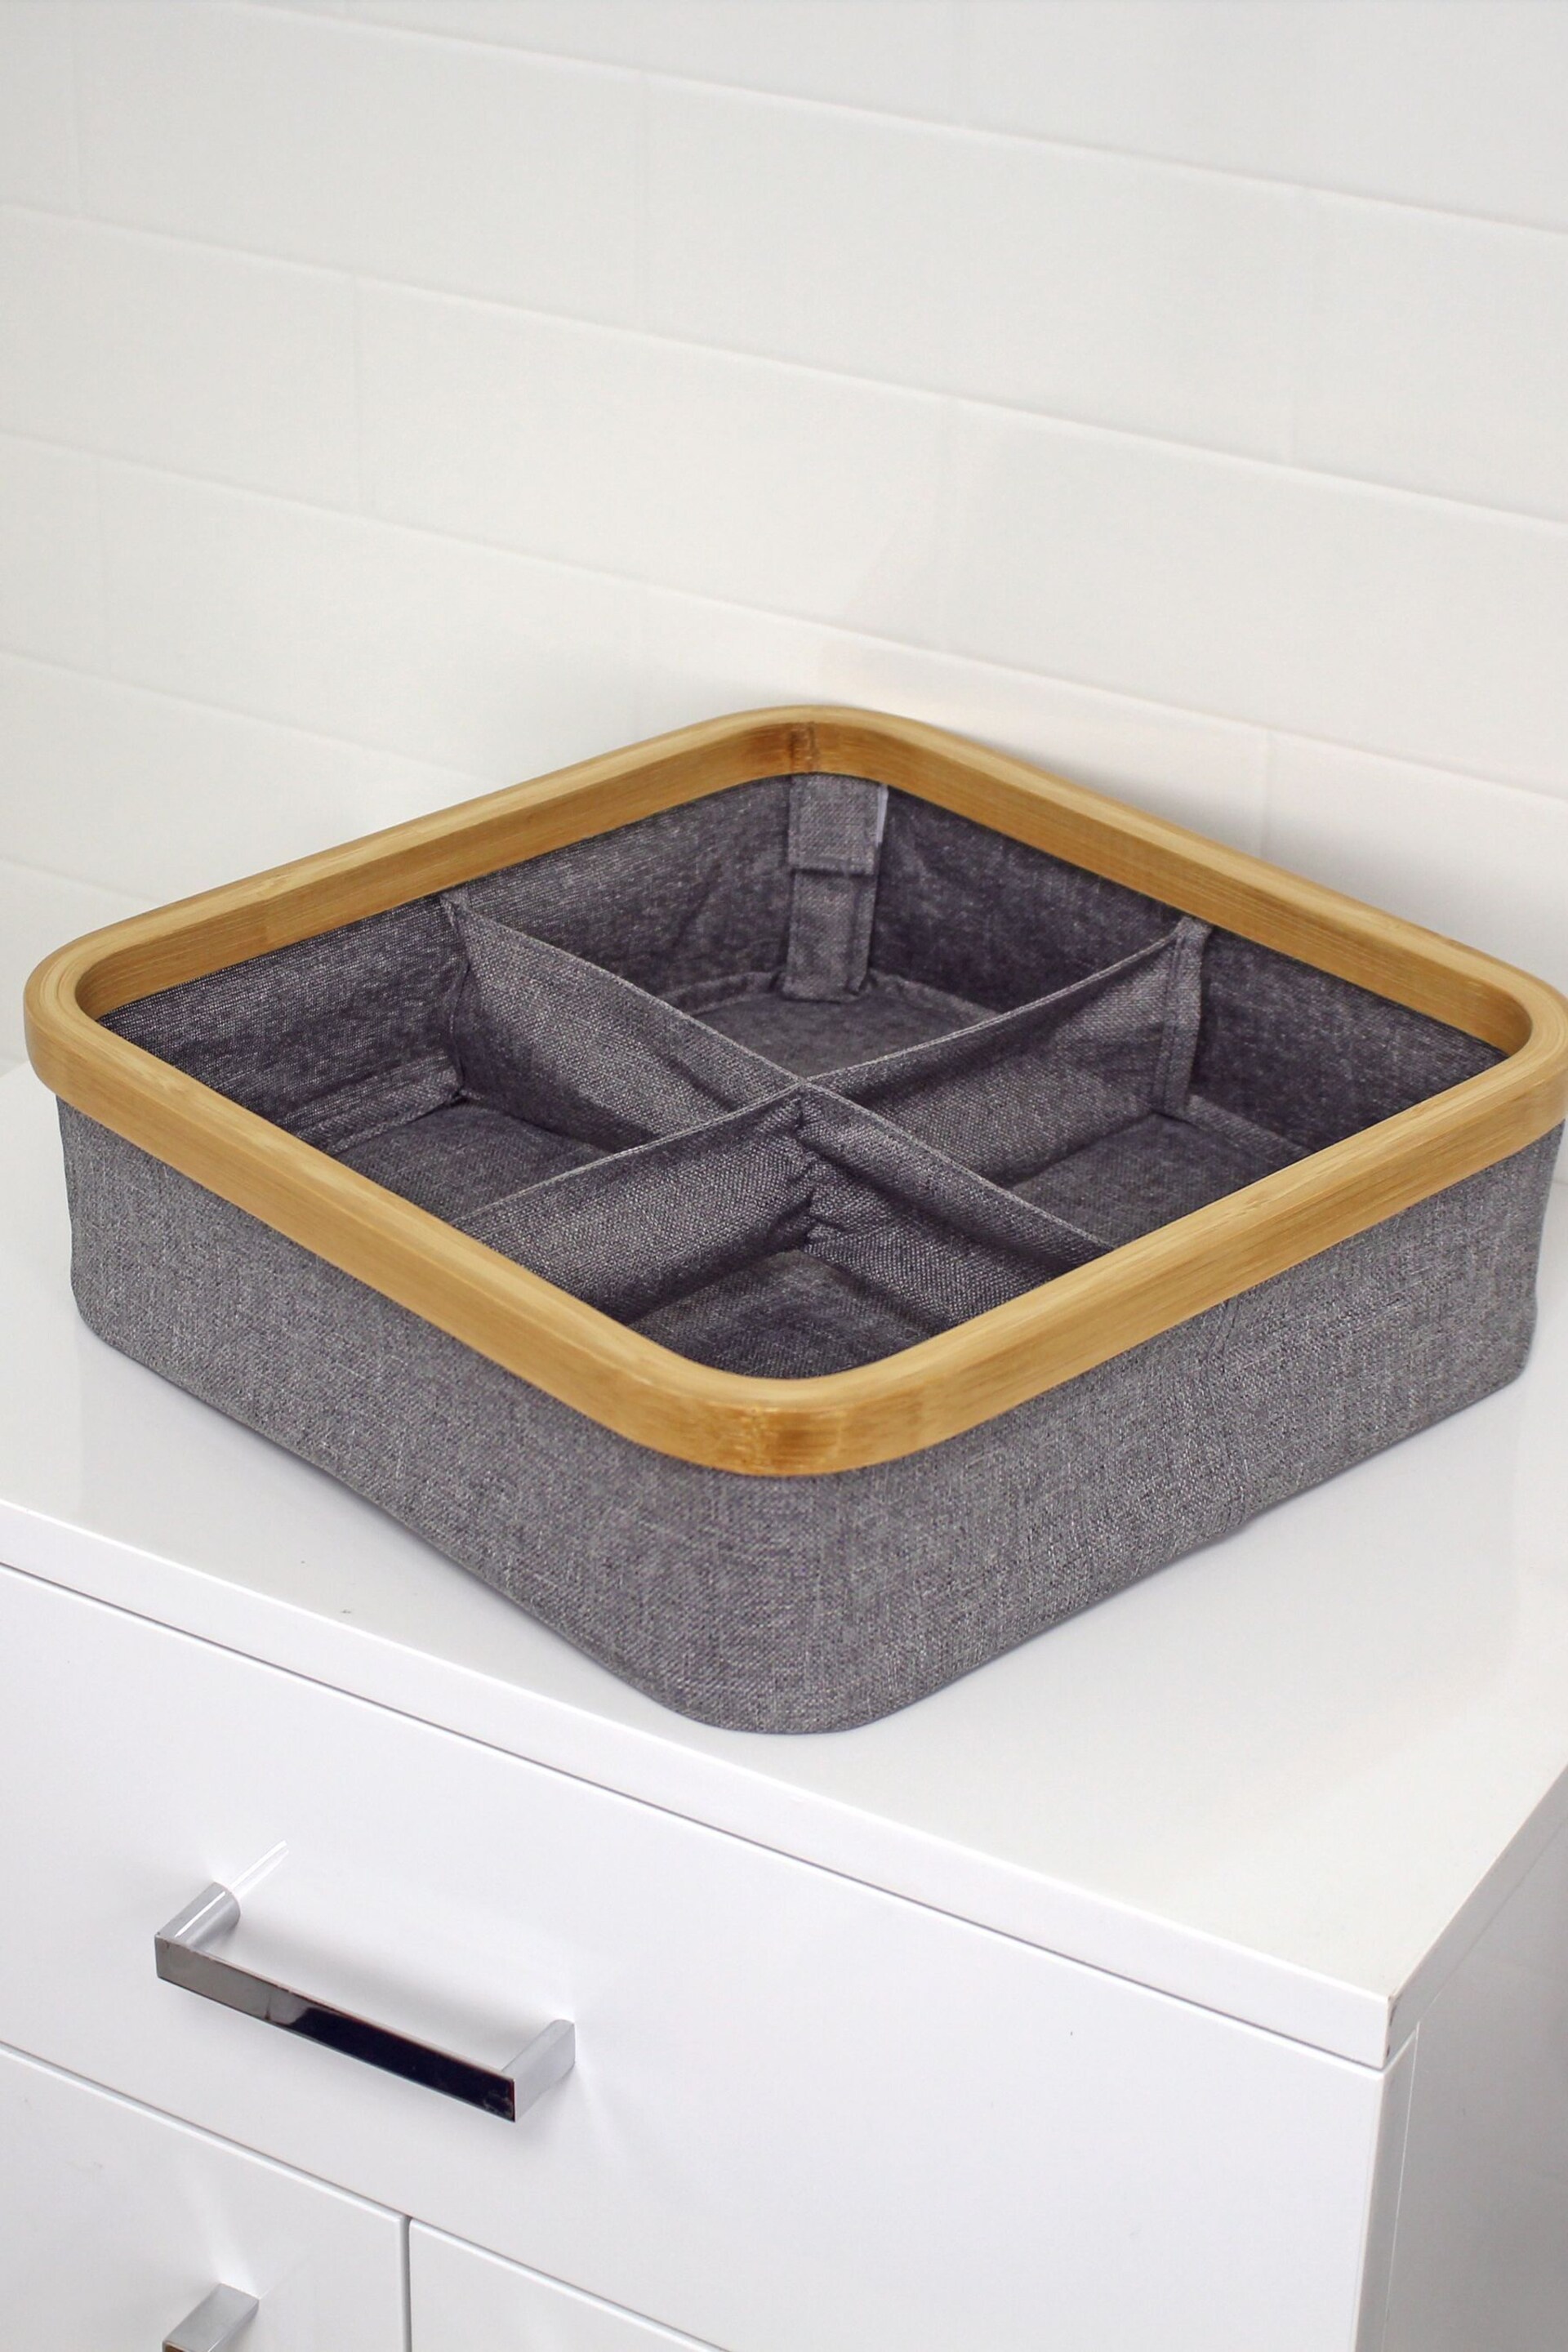 Showerdrape Grey Cotswold Storage Tray with 4 Compartments - Image 2 of 4